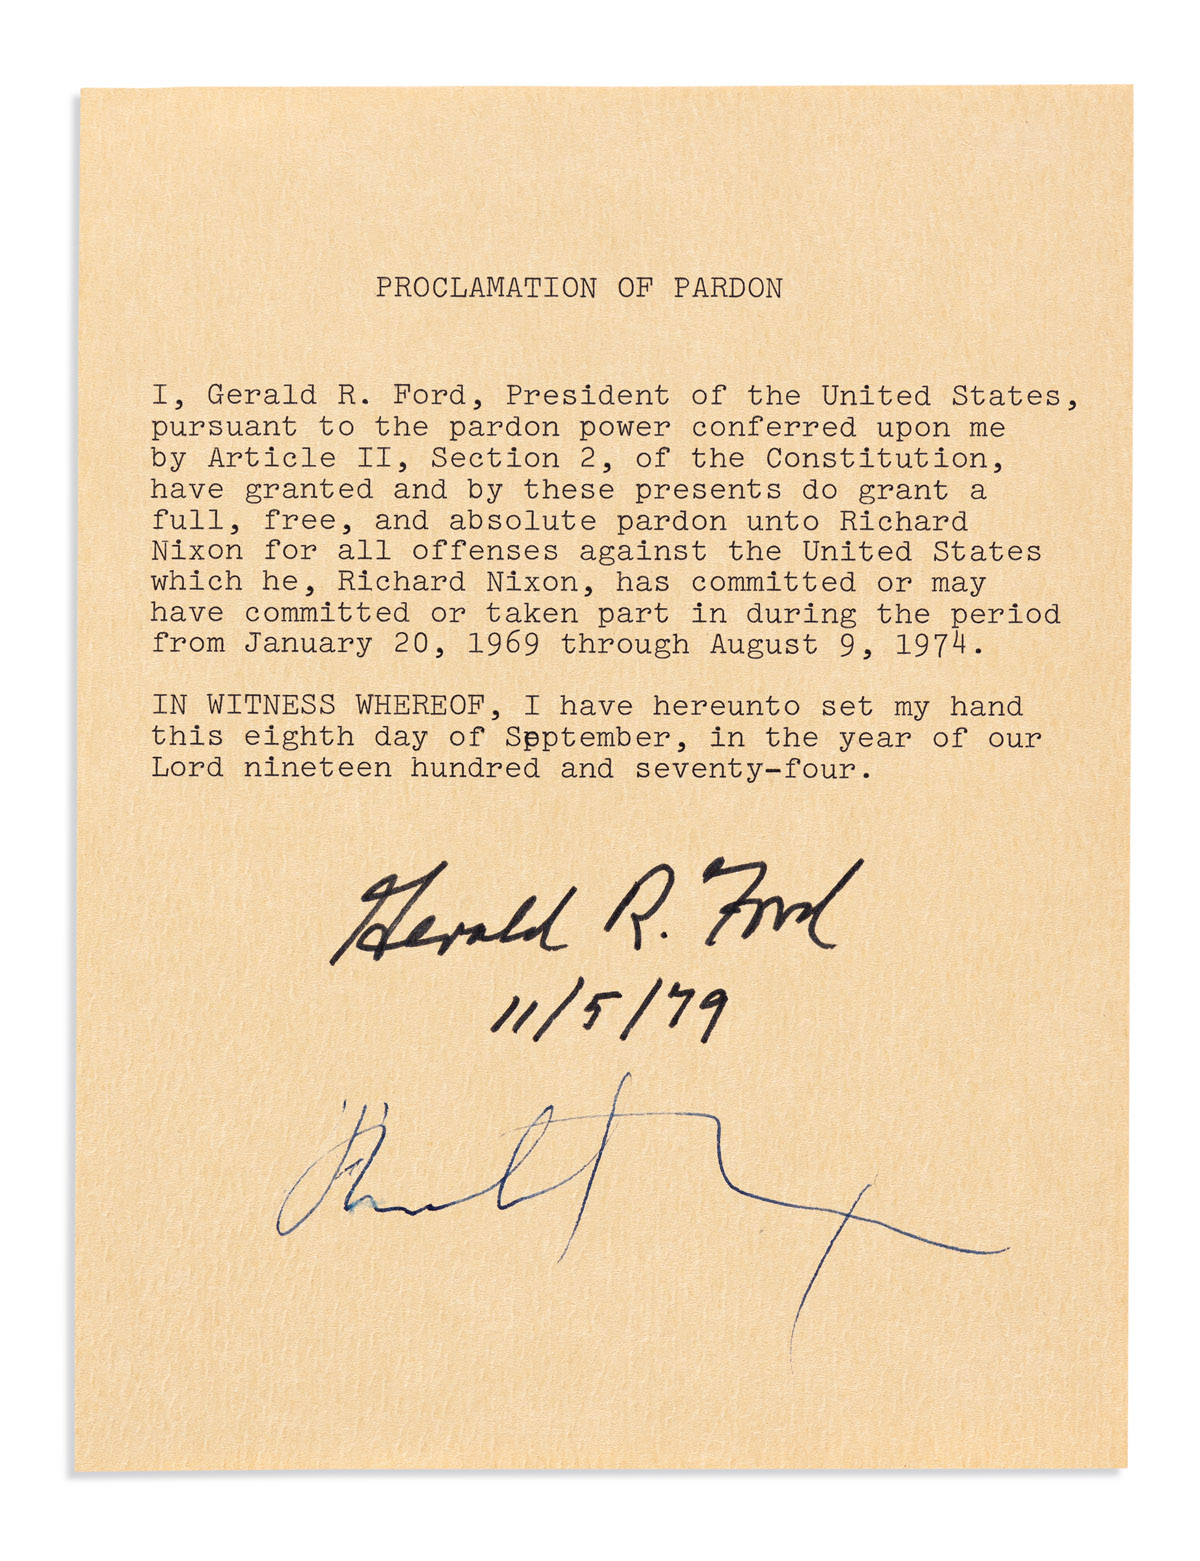 NIXON, RICHARD M.; AND FORD, GERALD R. Souvenir typescript of the last two paragraphs of Fords 1974 Proclamation of Pardon, Signed by